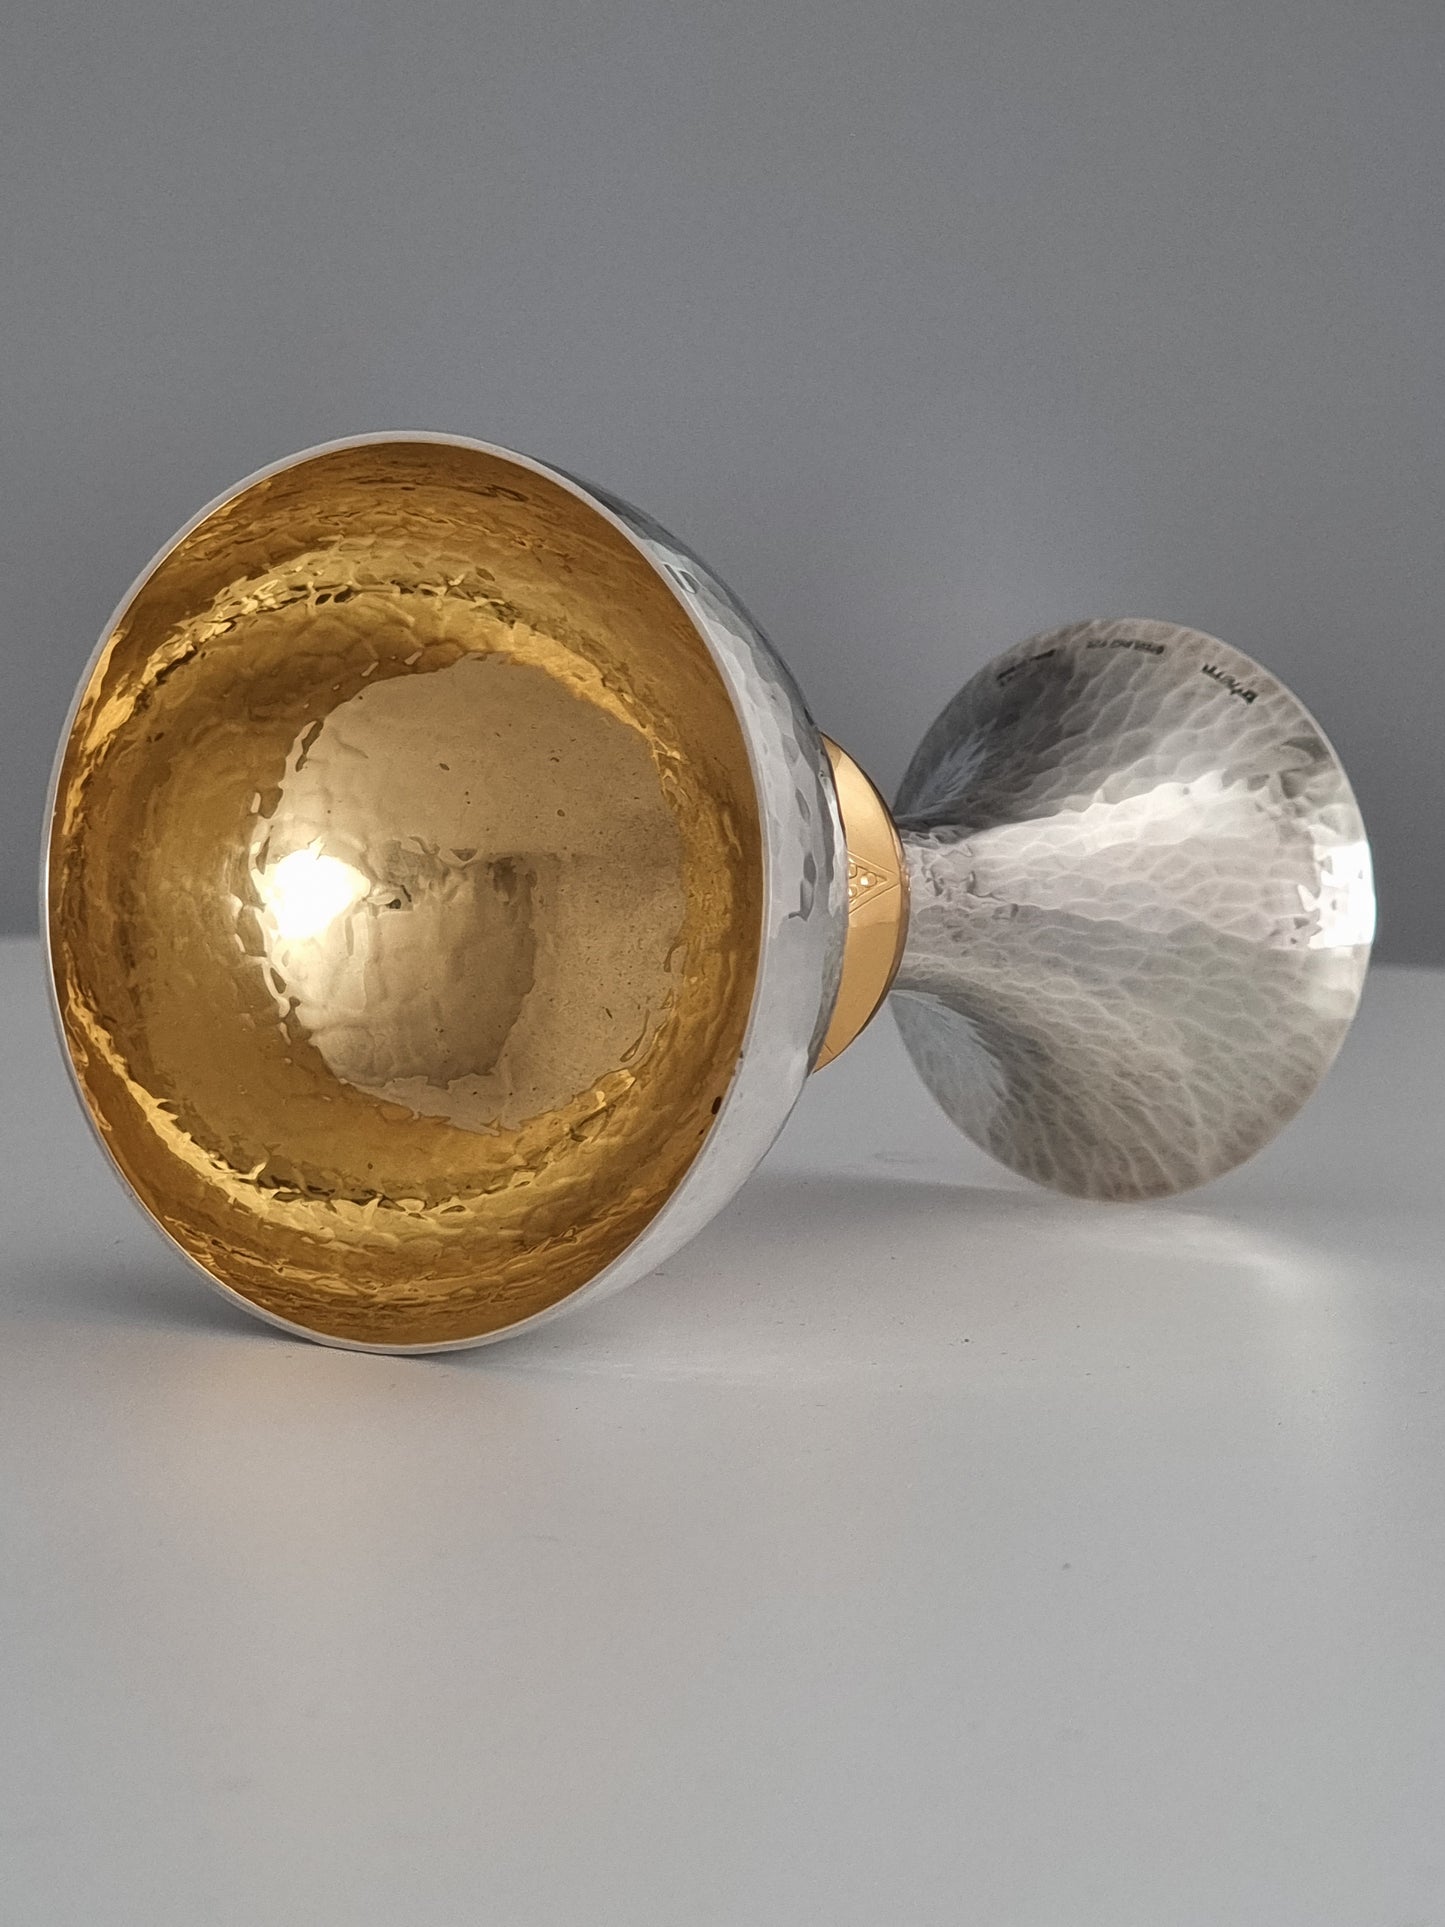 Hammered silver Kiddush cup gold plated on the inside